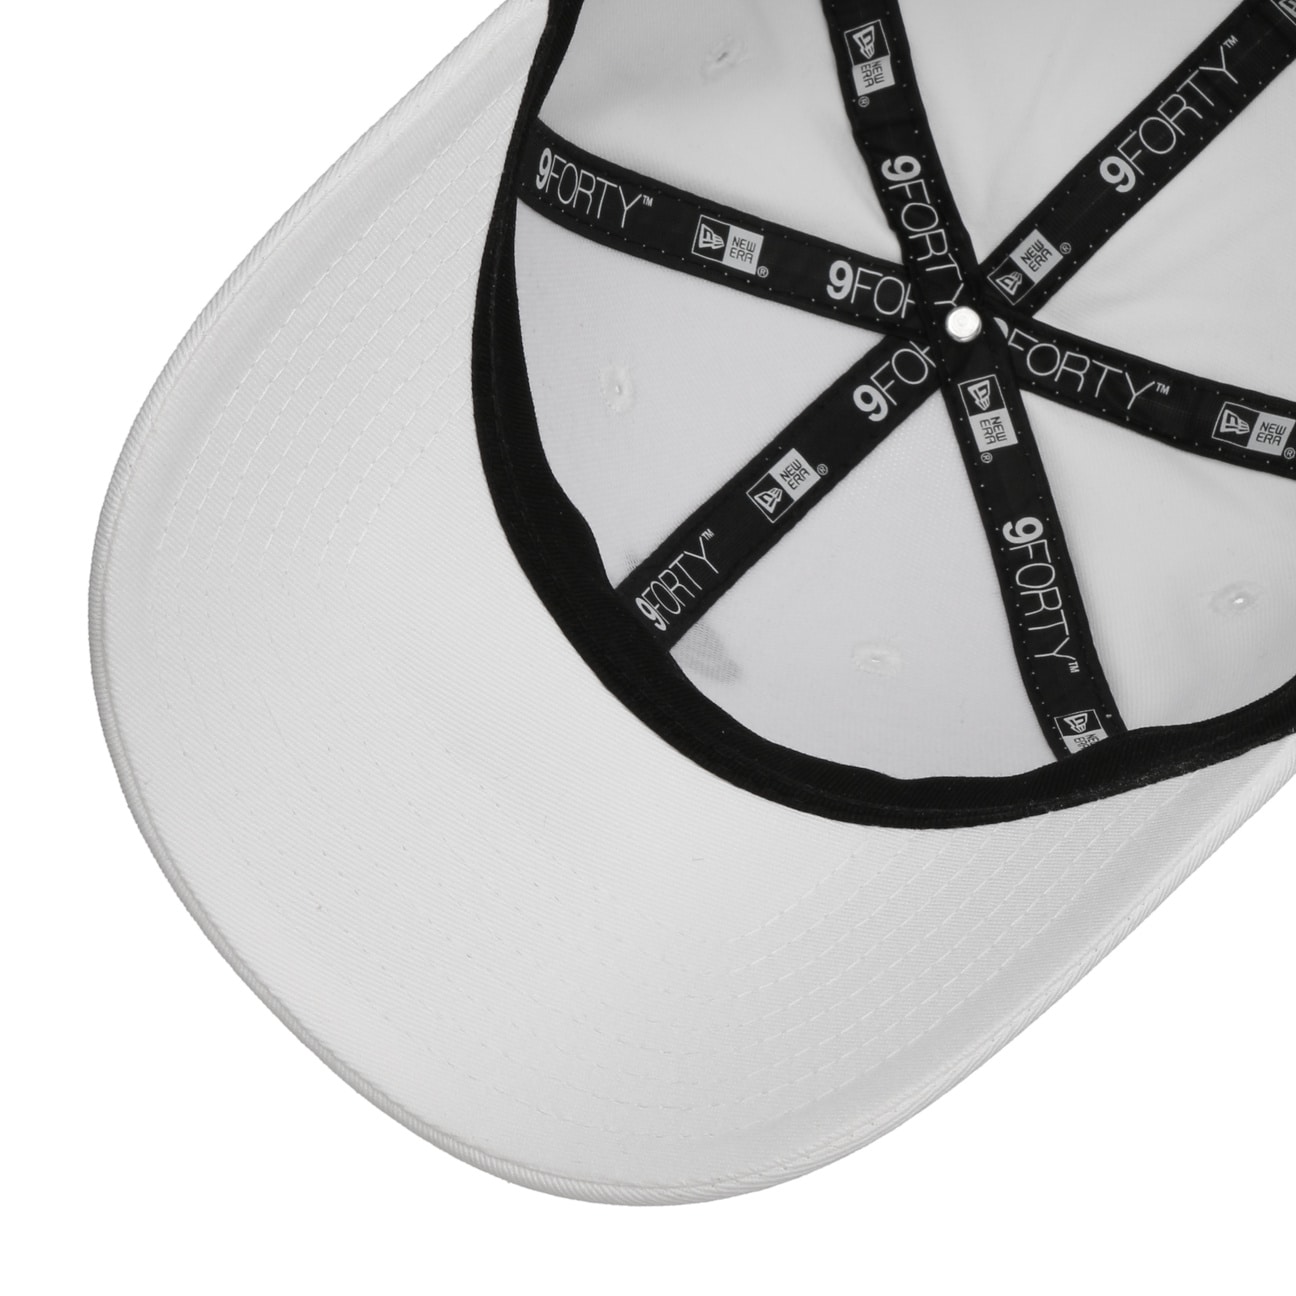 New Era 9Forty The League Chicago White Sox Cap - Black